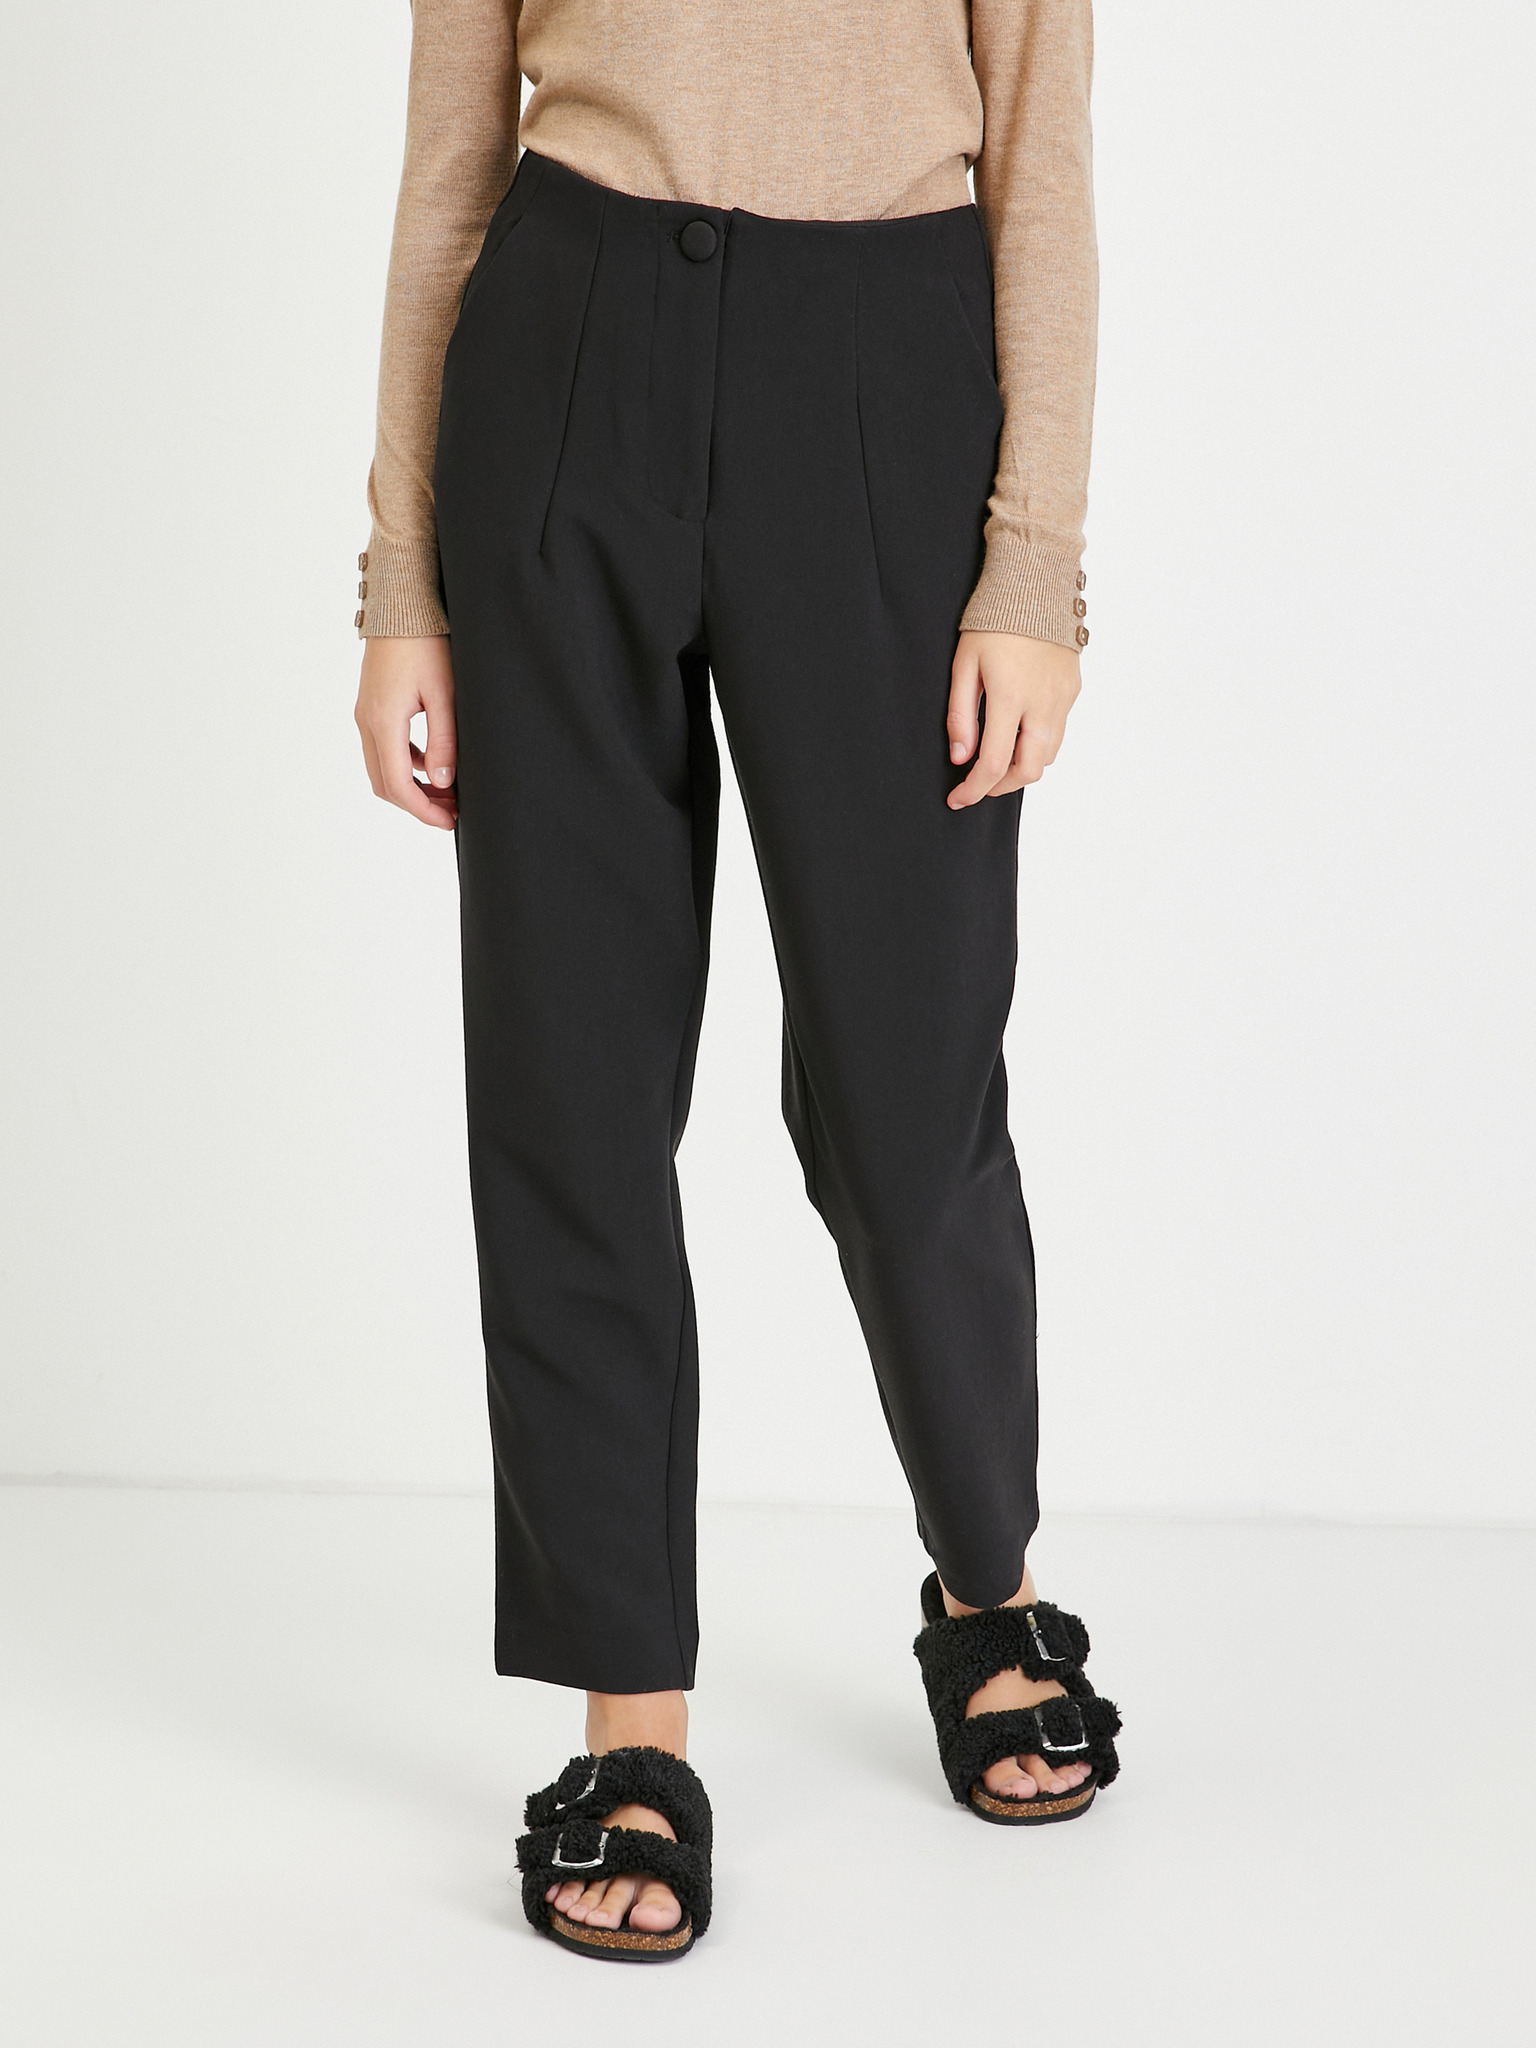 Topshop Embroidered Chiffon Beach Pants In Black - Part Of A Set | ModeSens